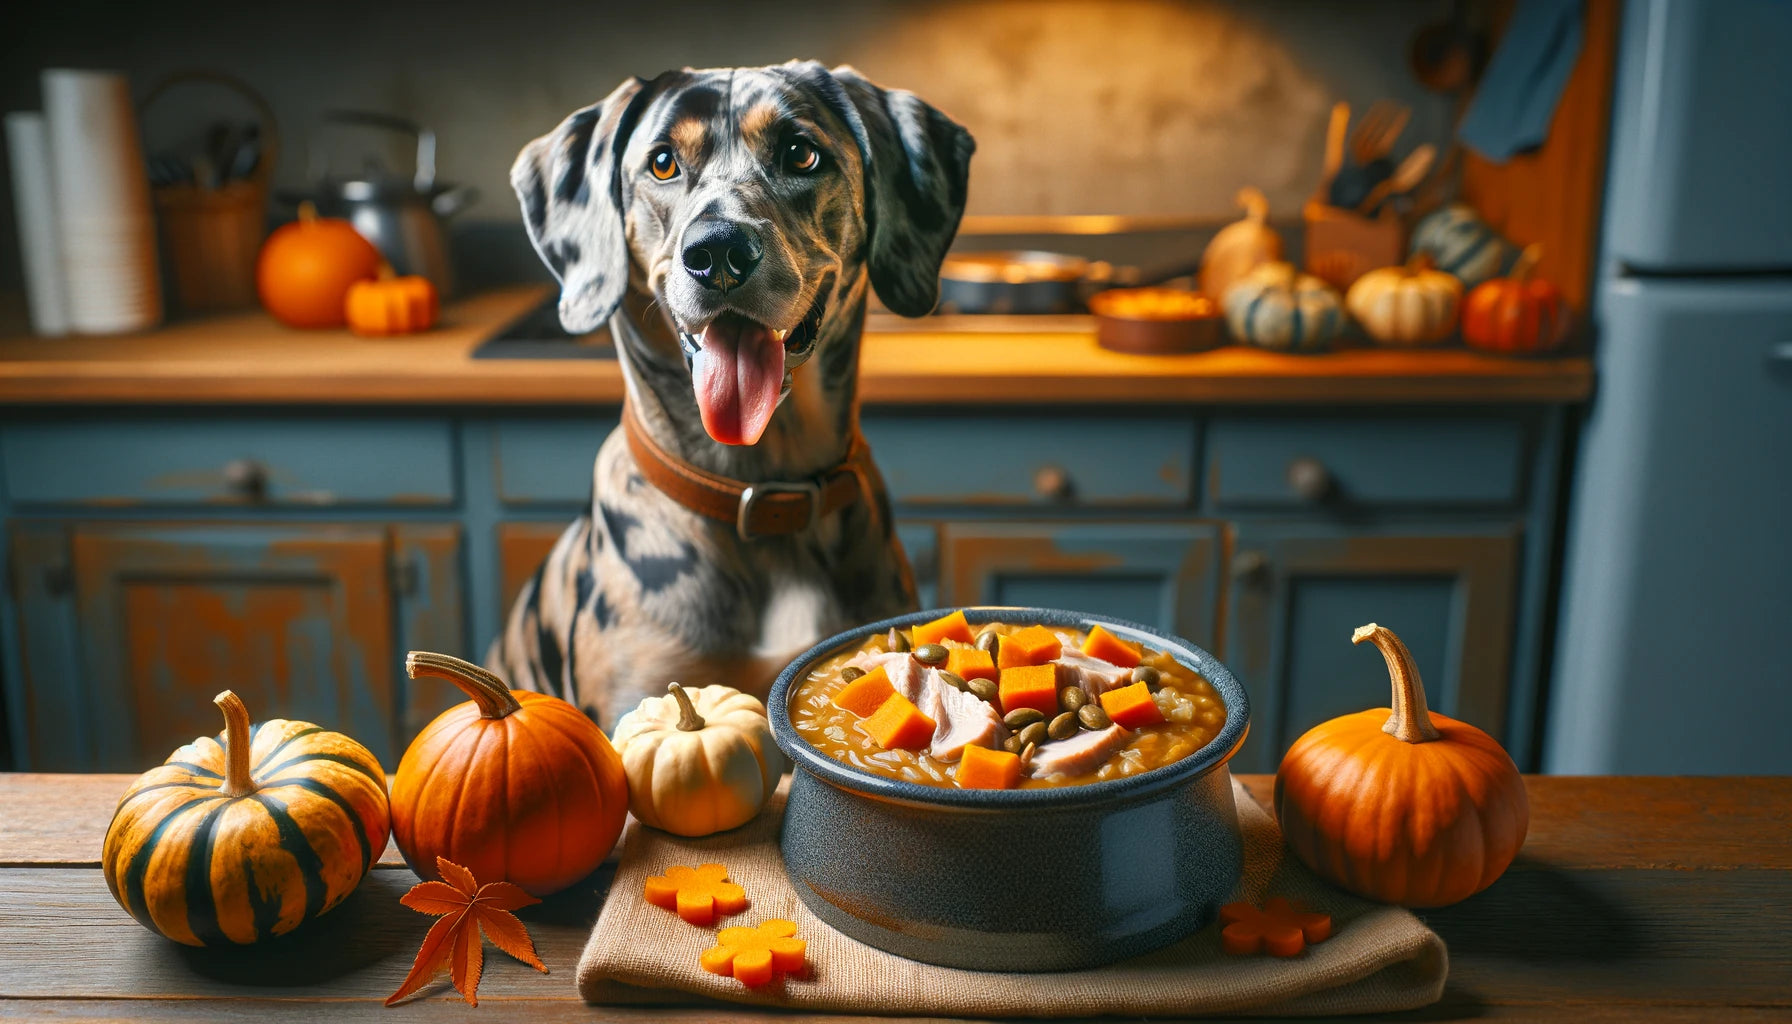 Turkey and Pumpkin Stew in a dog's bowl with a Catahoula Leopard Dog sitting next to it.